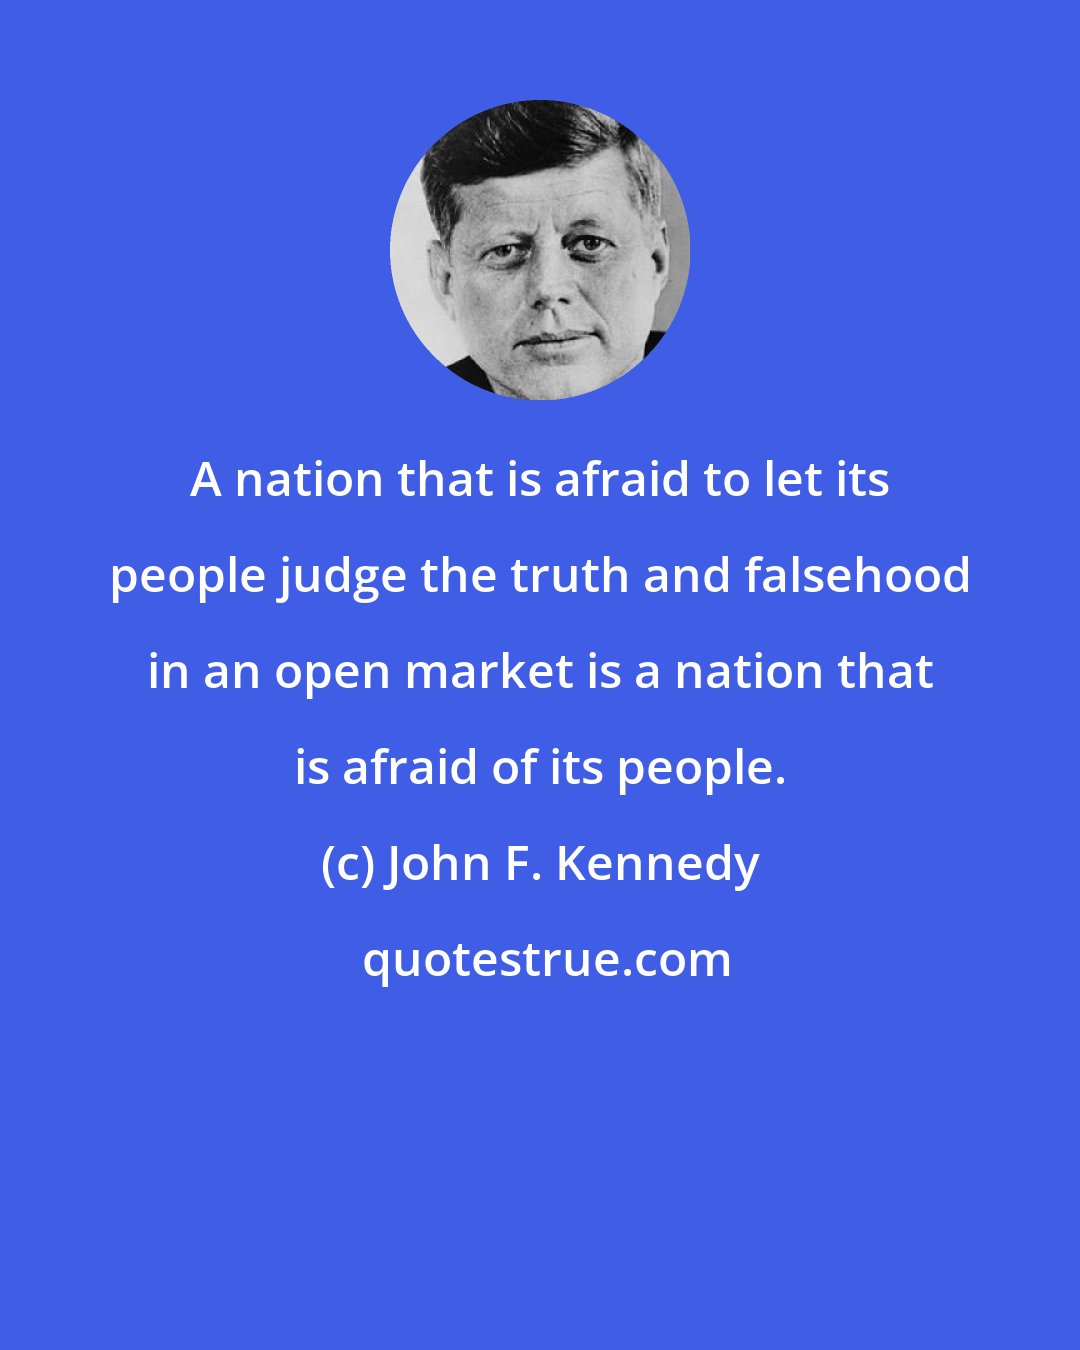 John F. Kennedy: A nation that is afraid to let its people judge the truth and falsehood in an open market is a nation that is afraid of its people.